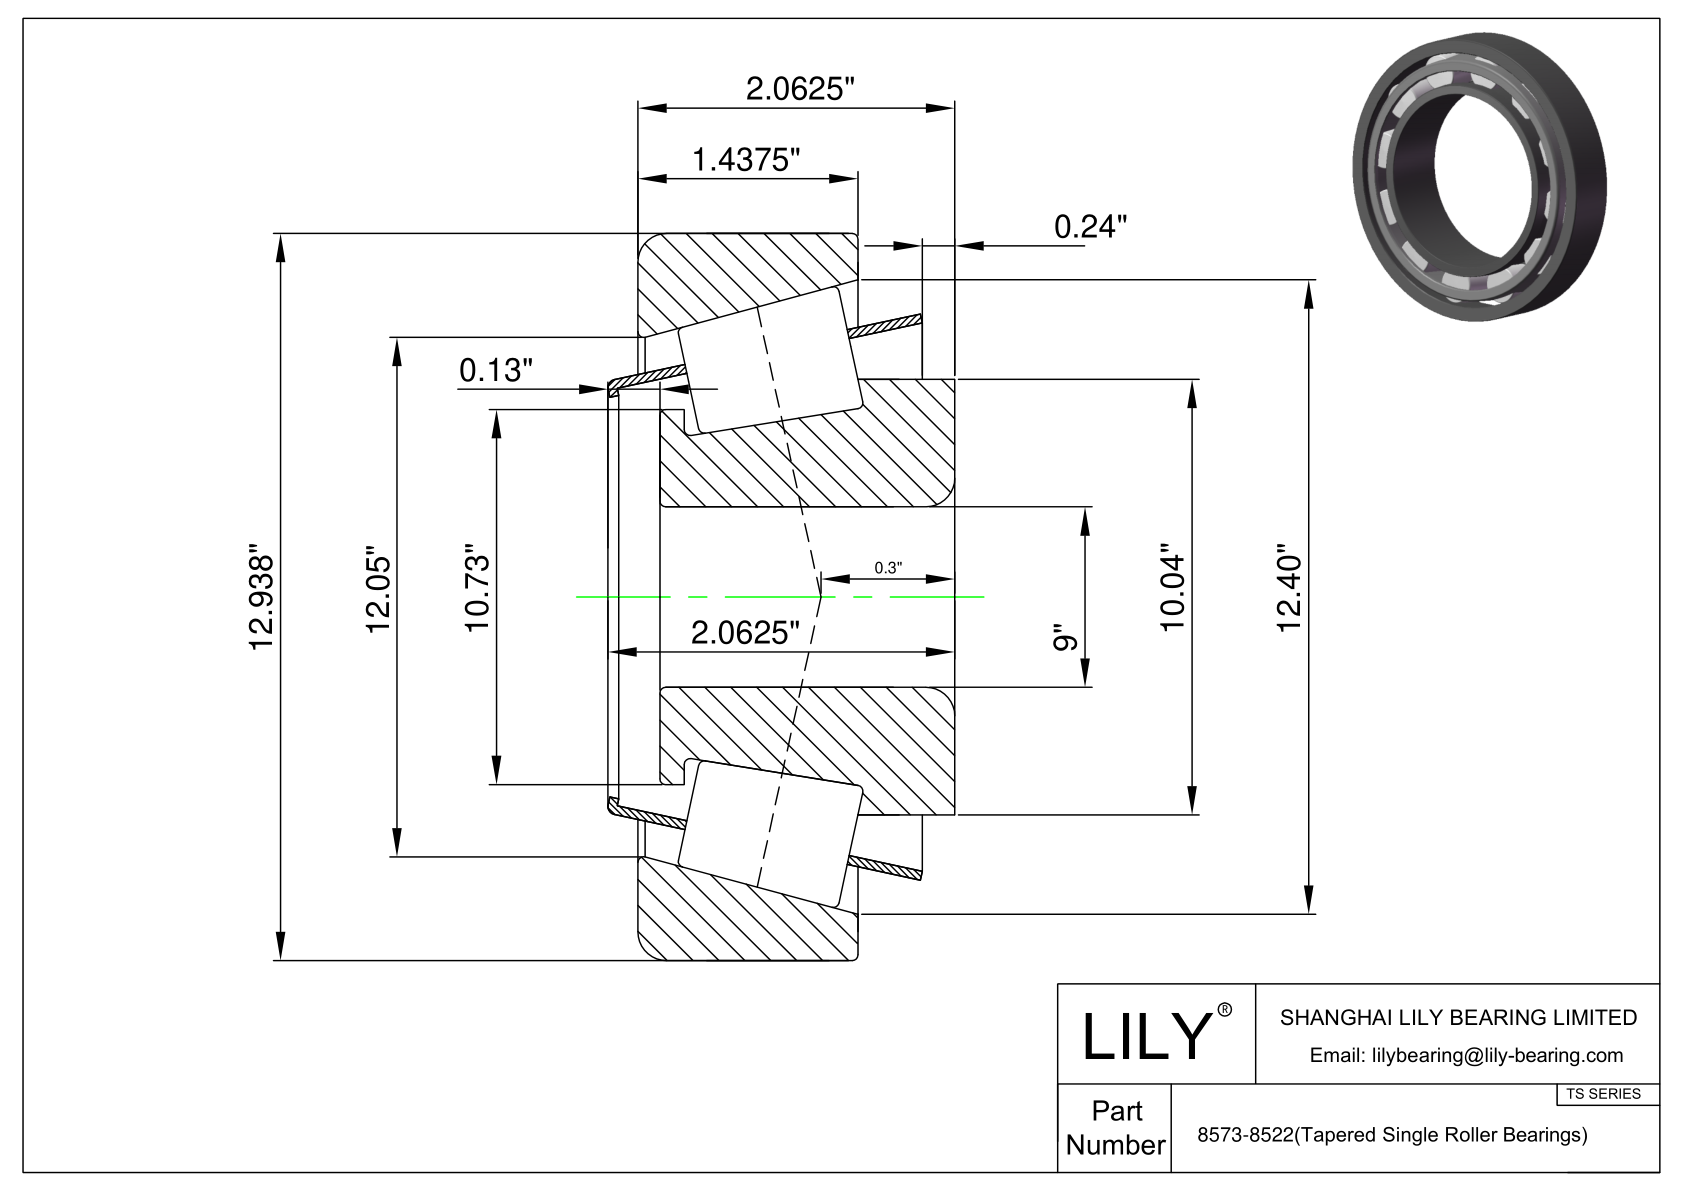 8573-8522 TS (Tapered Single Roller Bearings) (Imperial) cad drawing